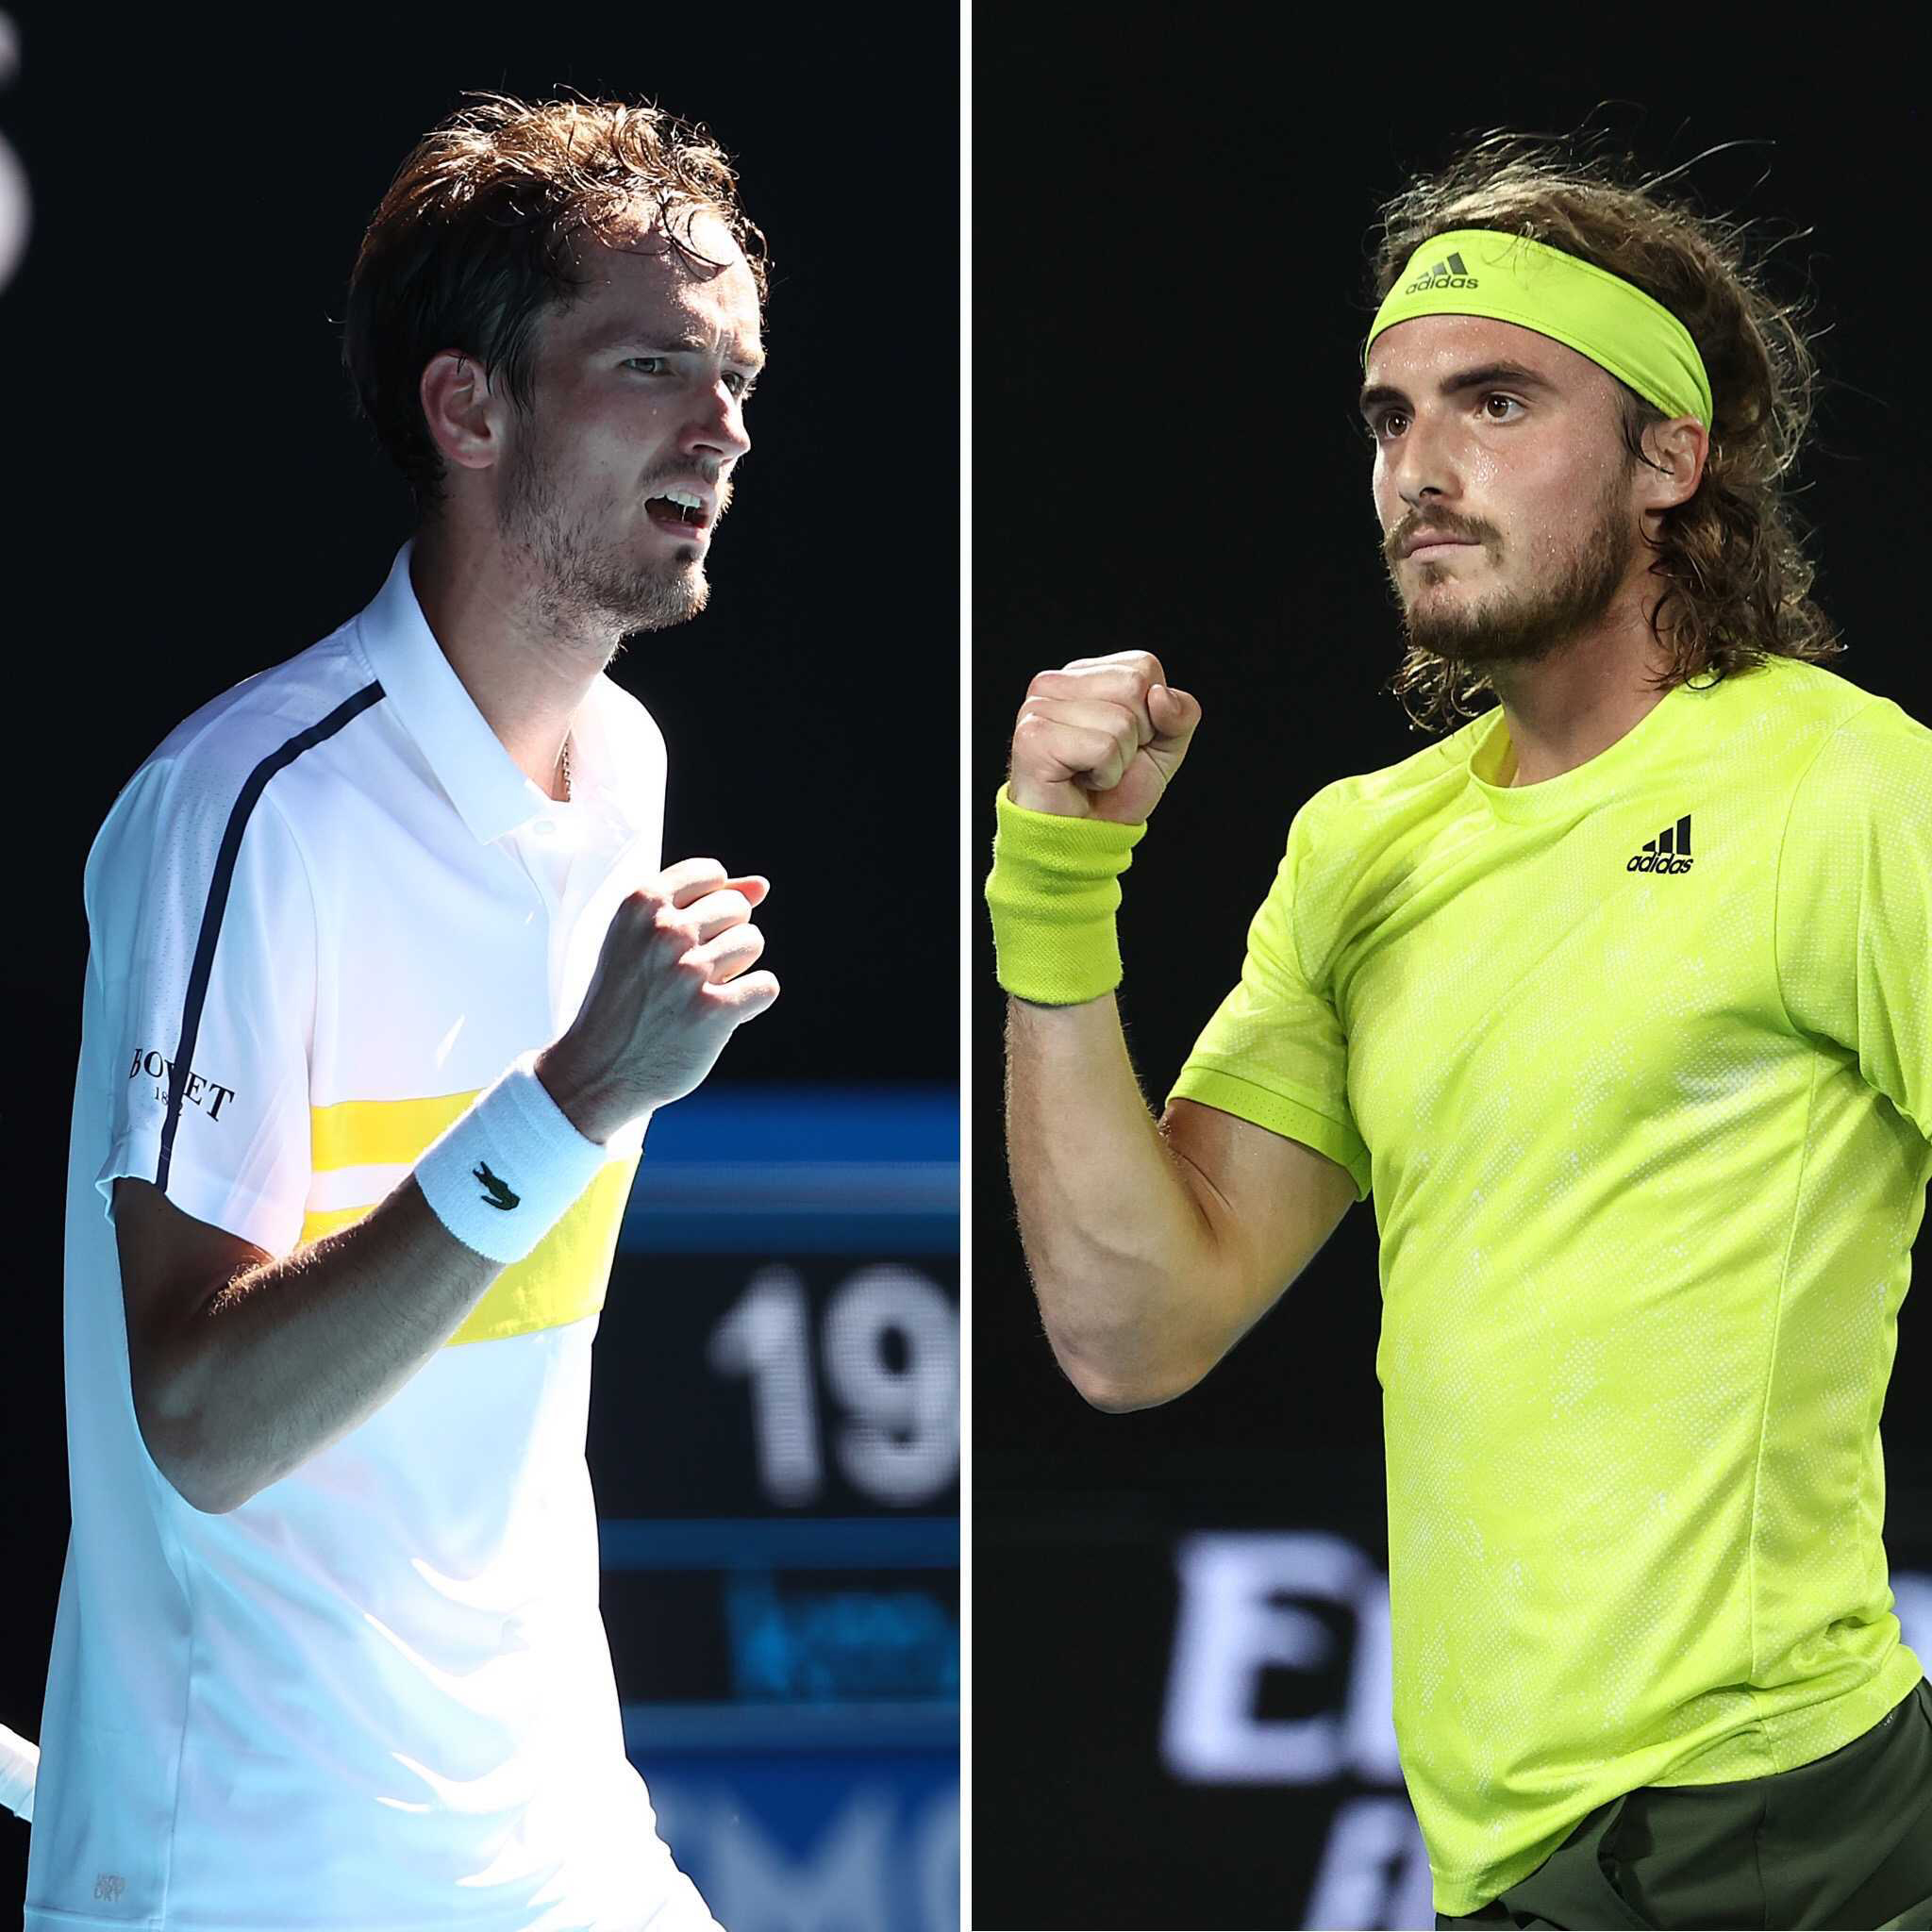 Stefanos Tsitsipas and Daniil Medvedev are meeting in the Aussie semis, and boy do they hate each other This is the Loop GolfDigest